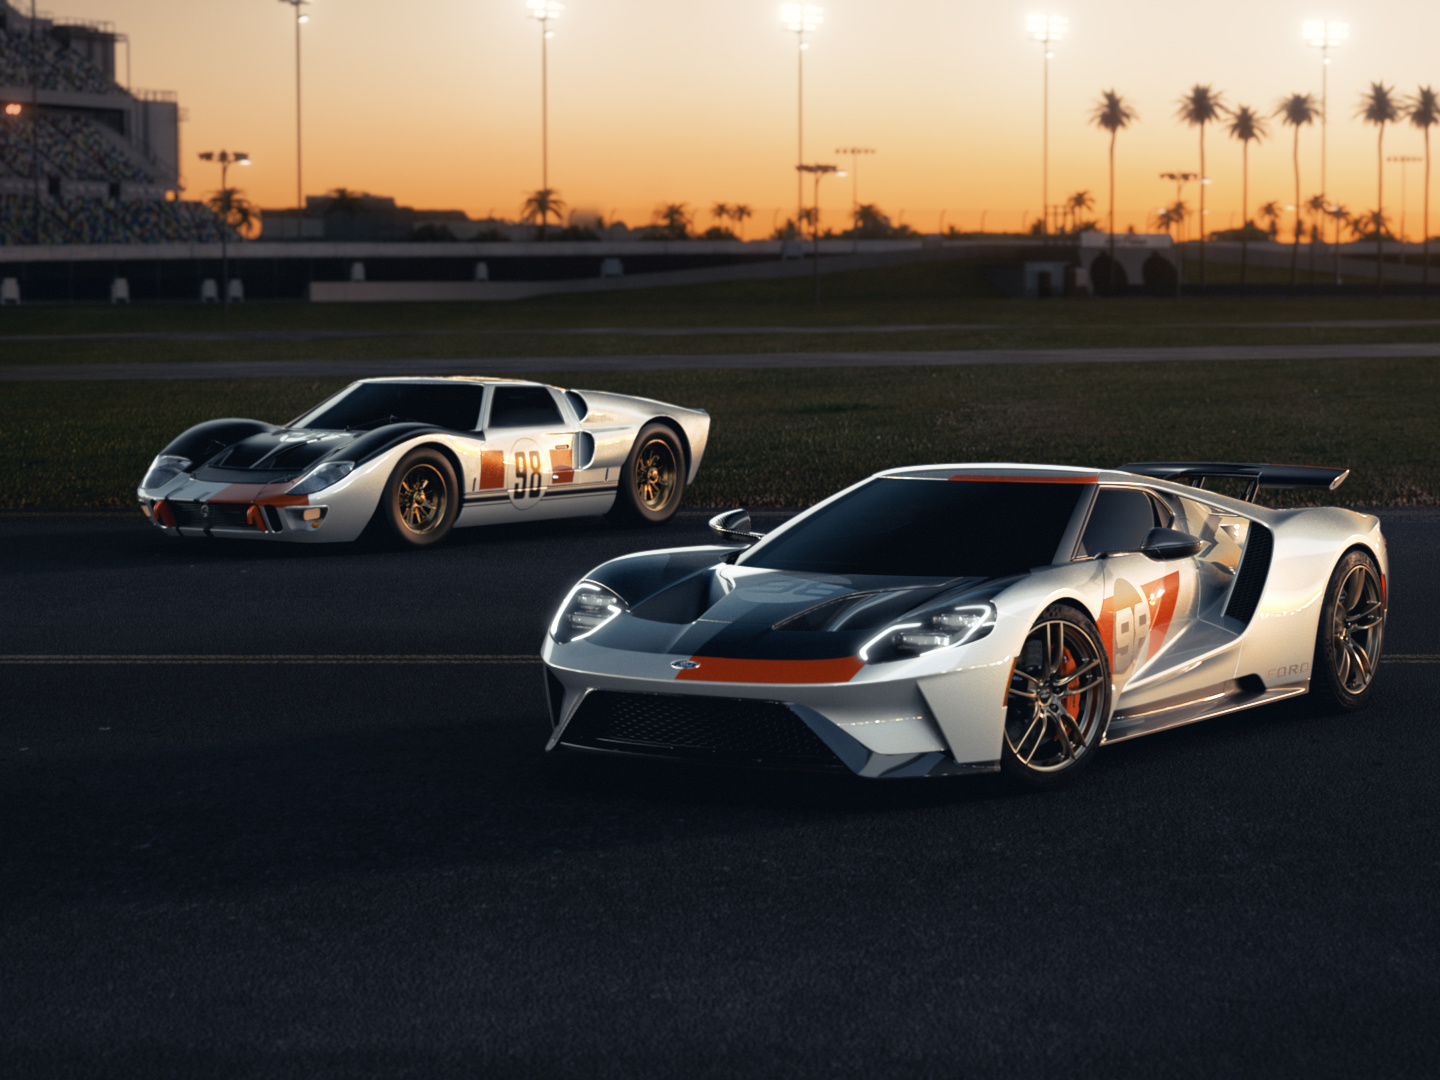 A limited run of Ford GT Heritage Edition models will feature a race-inspired livery.